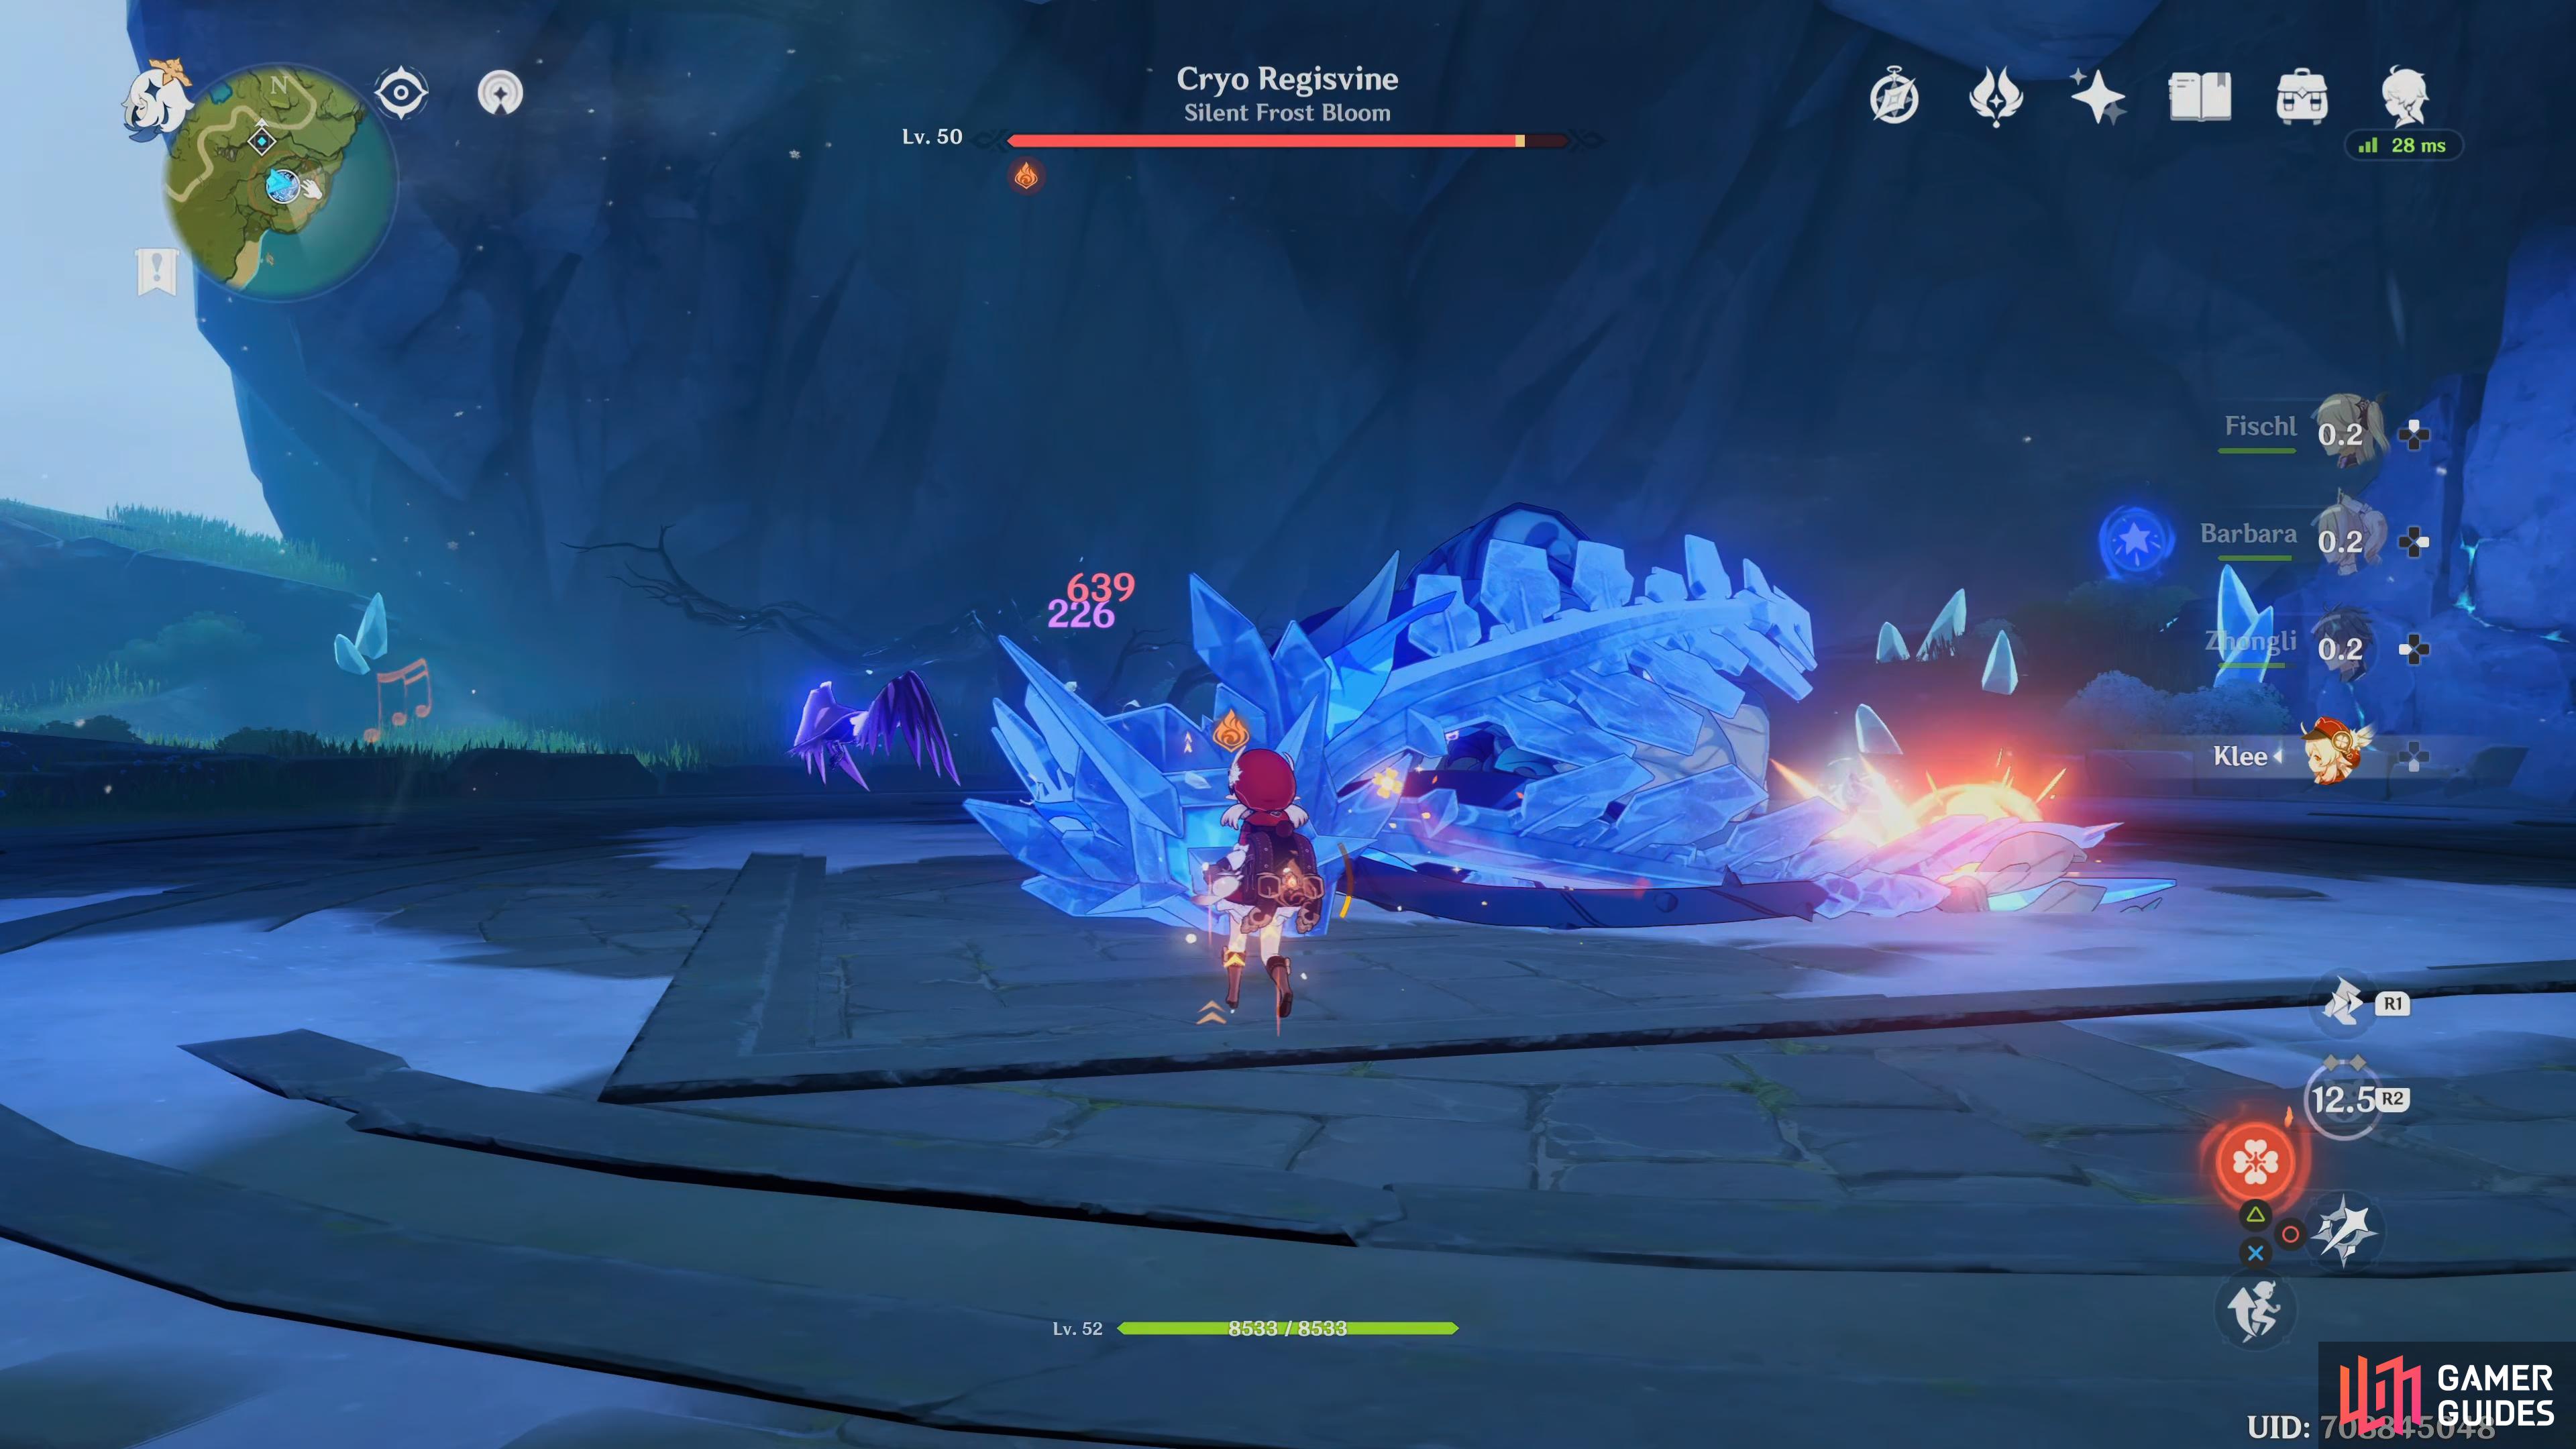 When you break one of the bosses shields, it will hit the floor, this is the DPS Phase.